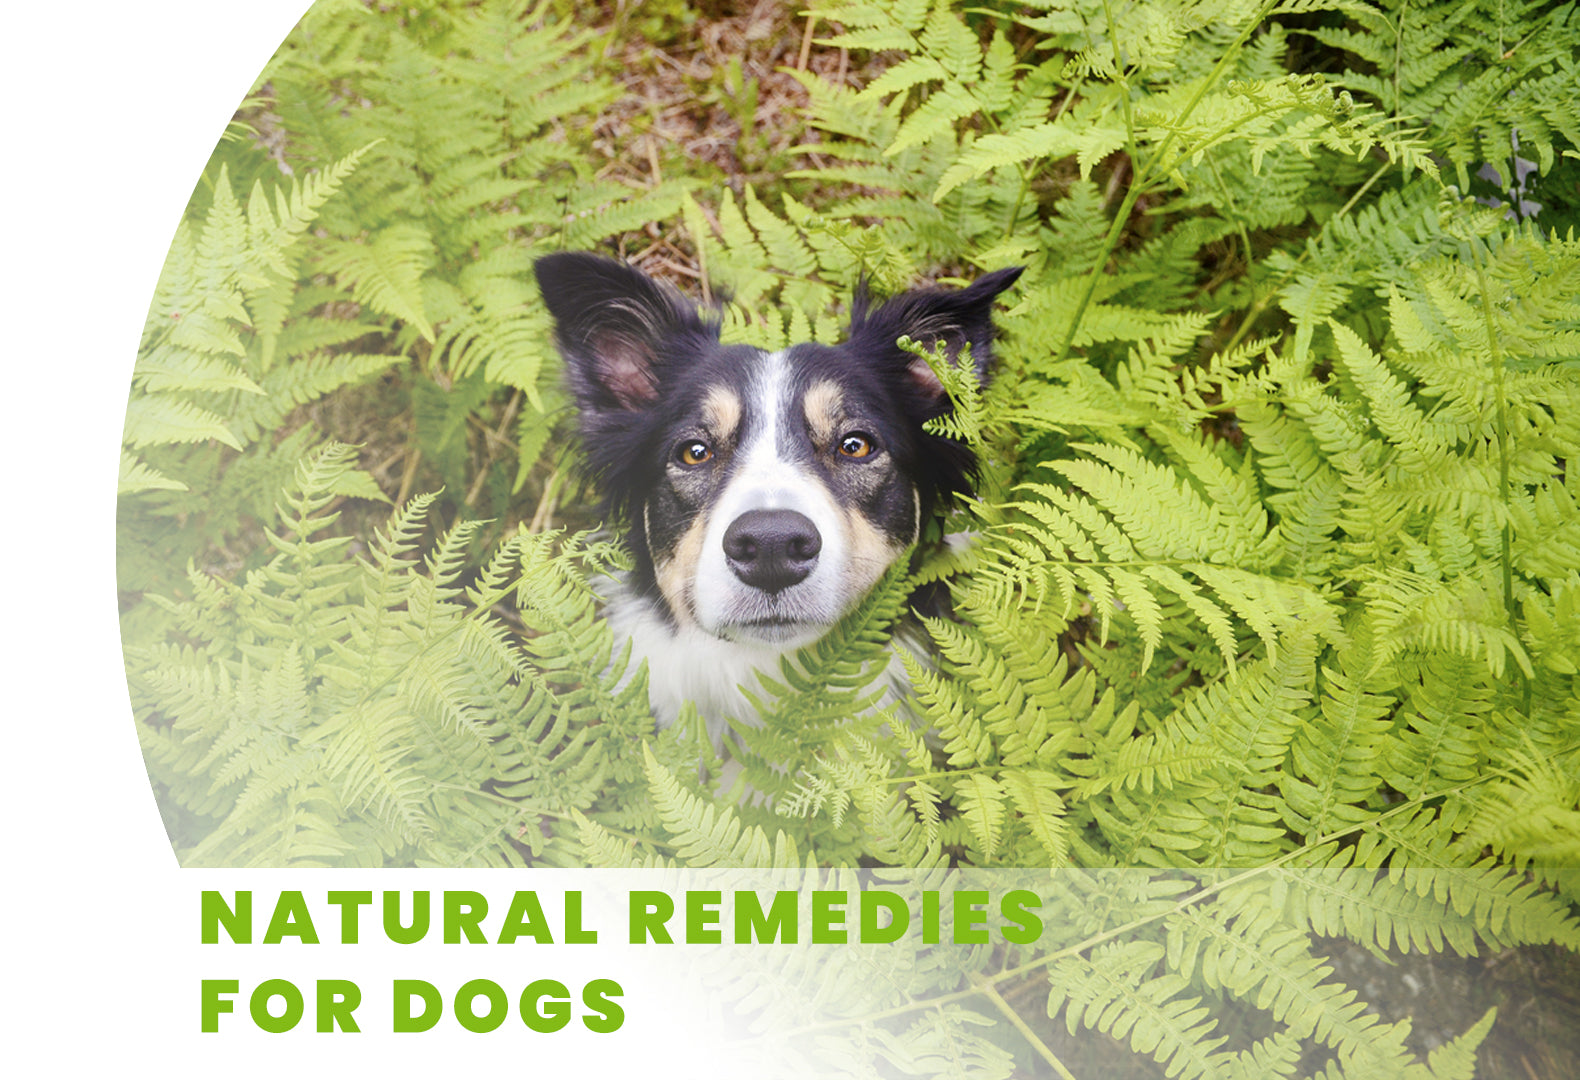 General Health - Organic Herbal Health for Dogs